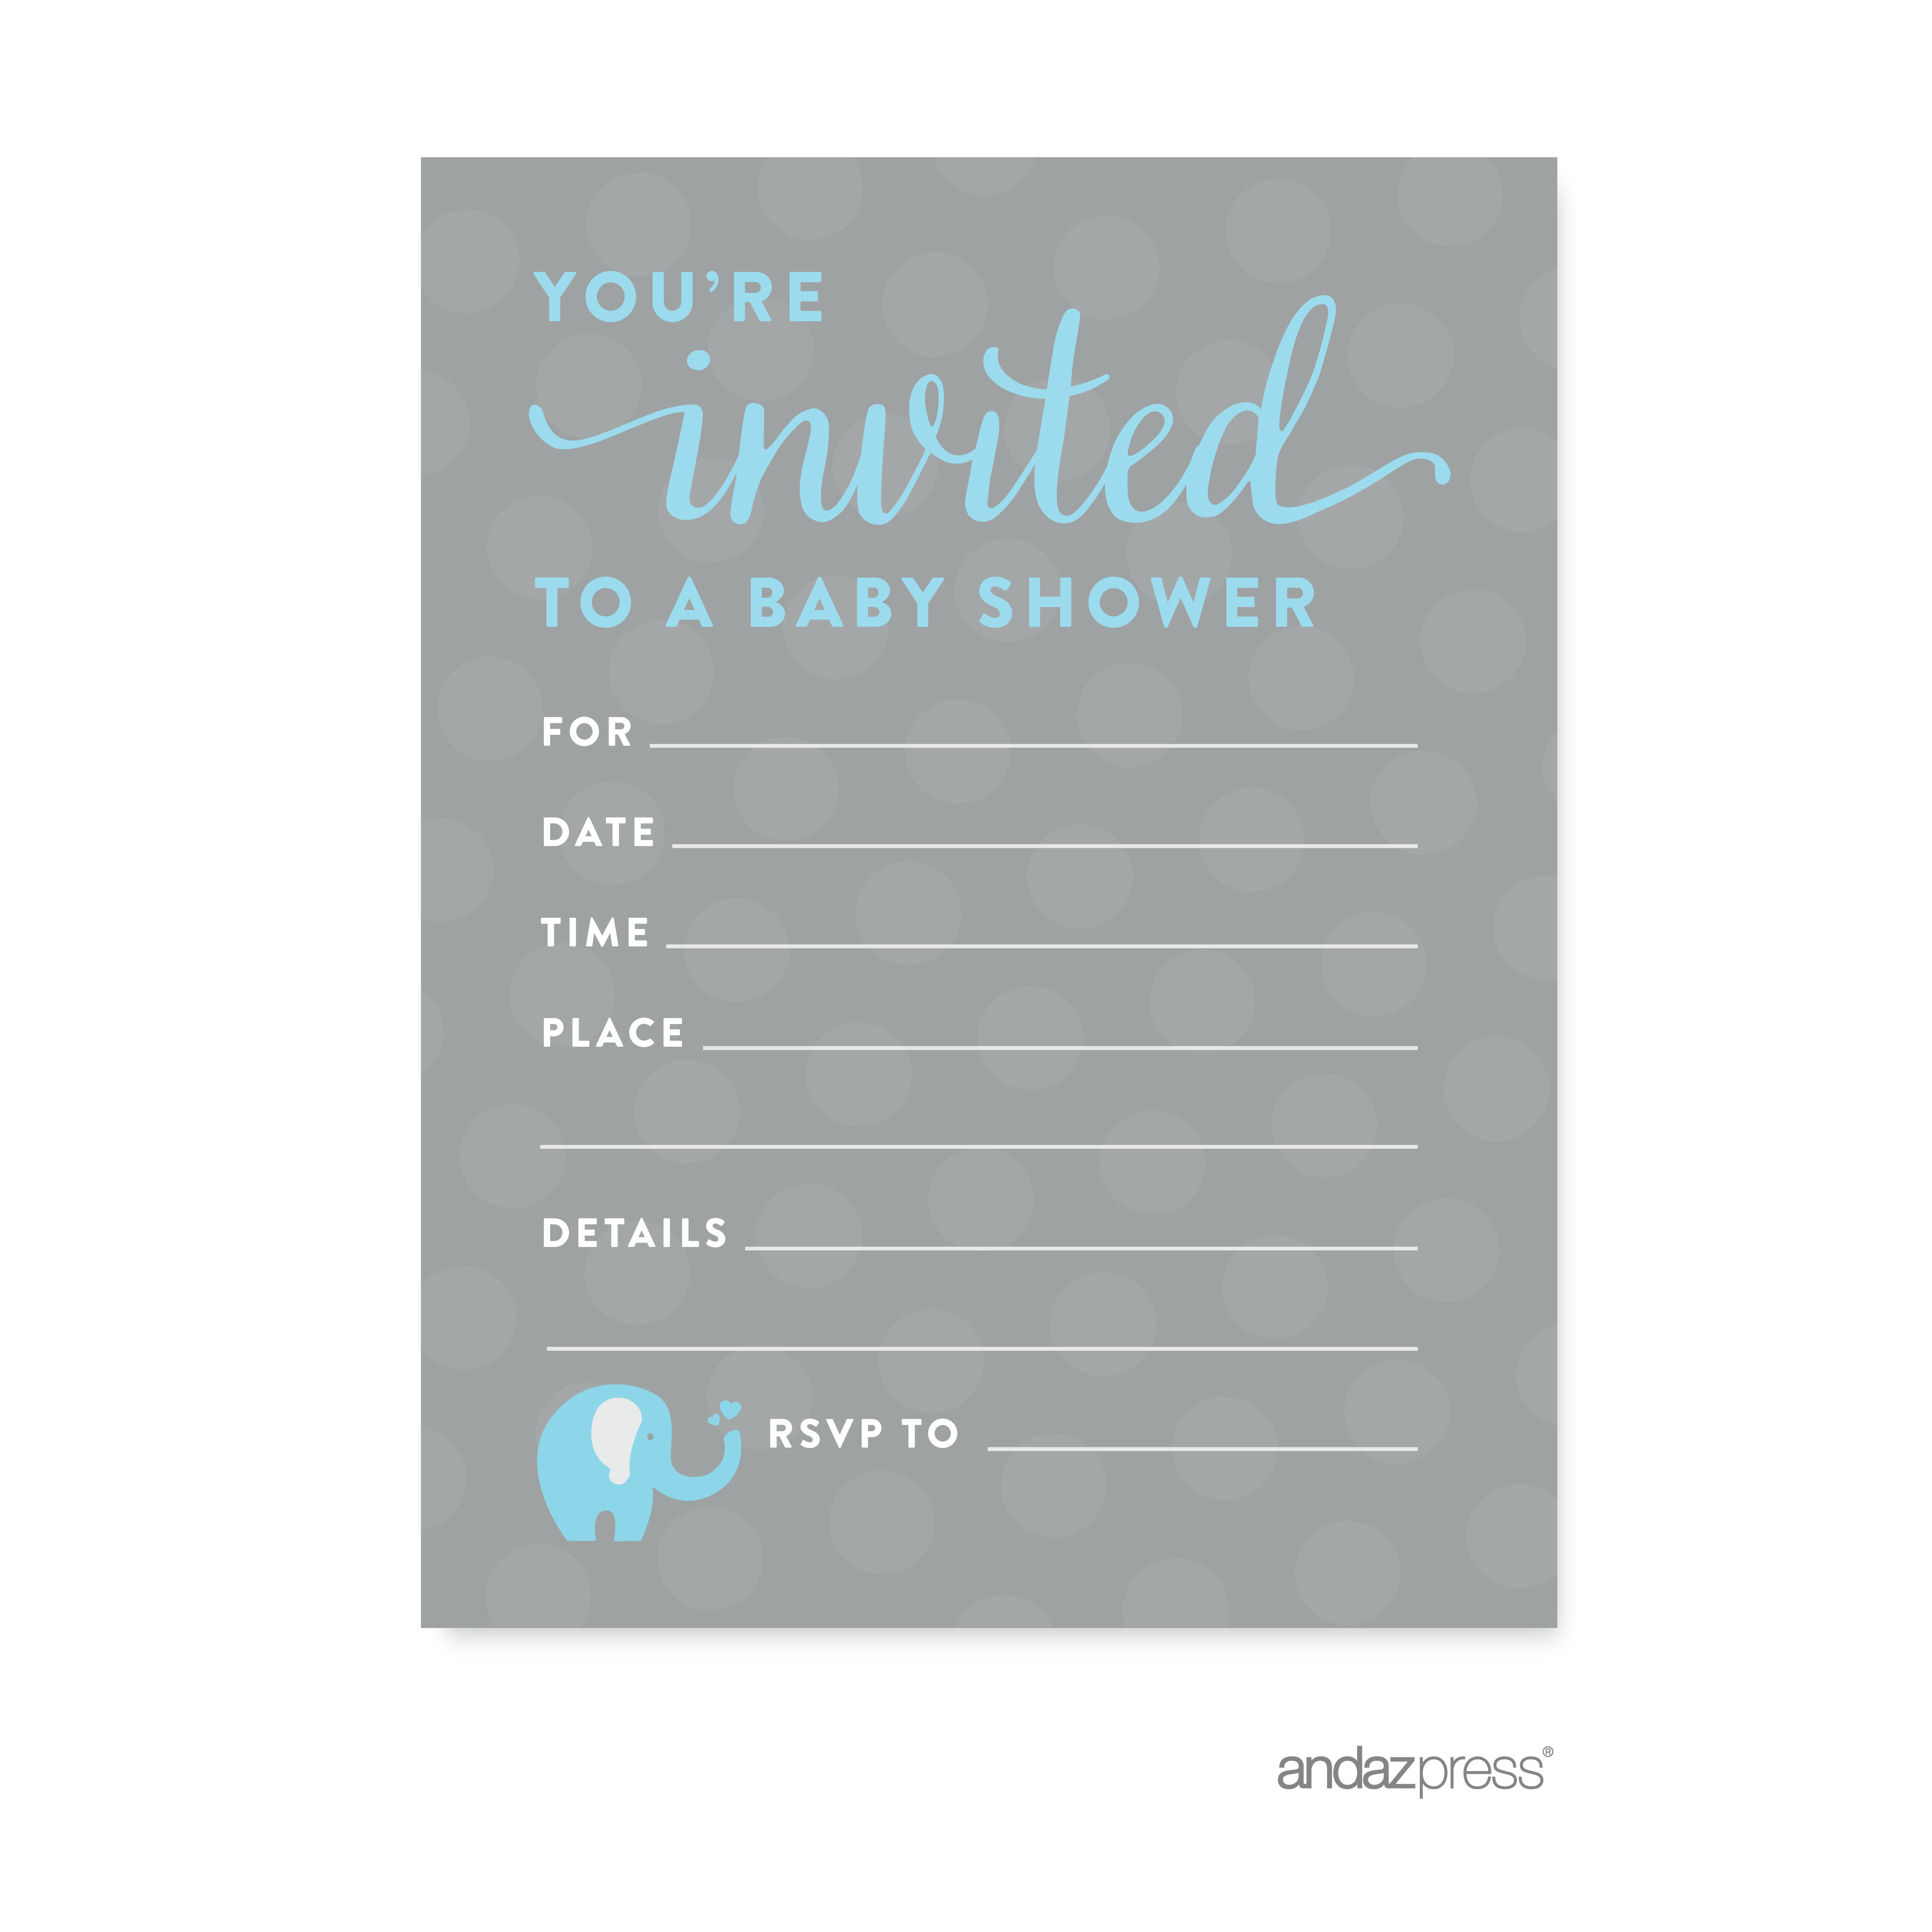 Full Size of Baby Shower:free Printable Baby Shower Games Elegant Baby Shower Baby Shower Centerpiece Ideas For Boys Nursery For Girls Unique Baby Shower Ideas Girl Baby Shower Decorations Baby Shower Invitations For Boys Baby Boy Shower Ideas